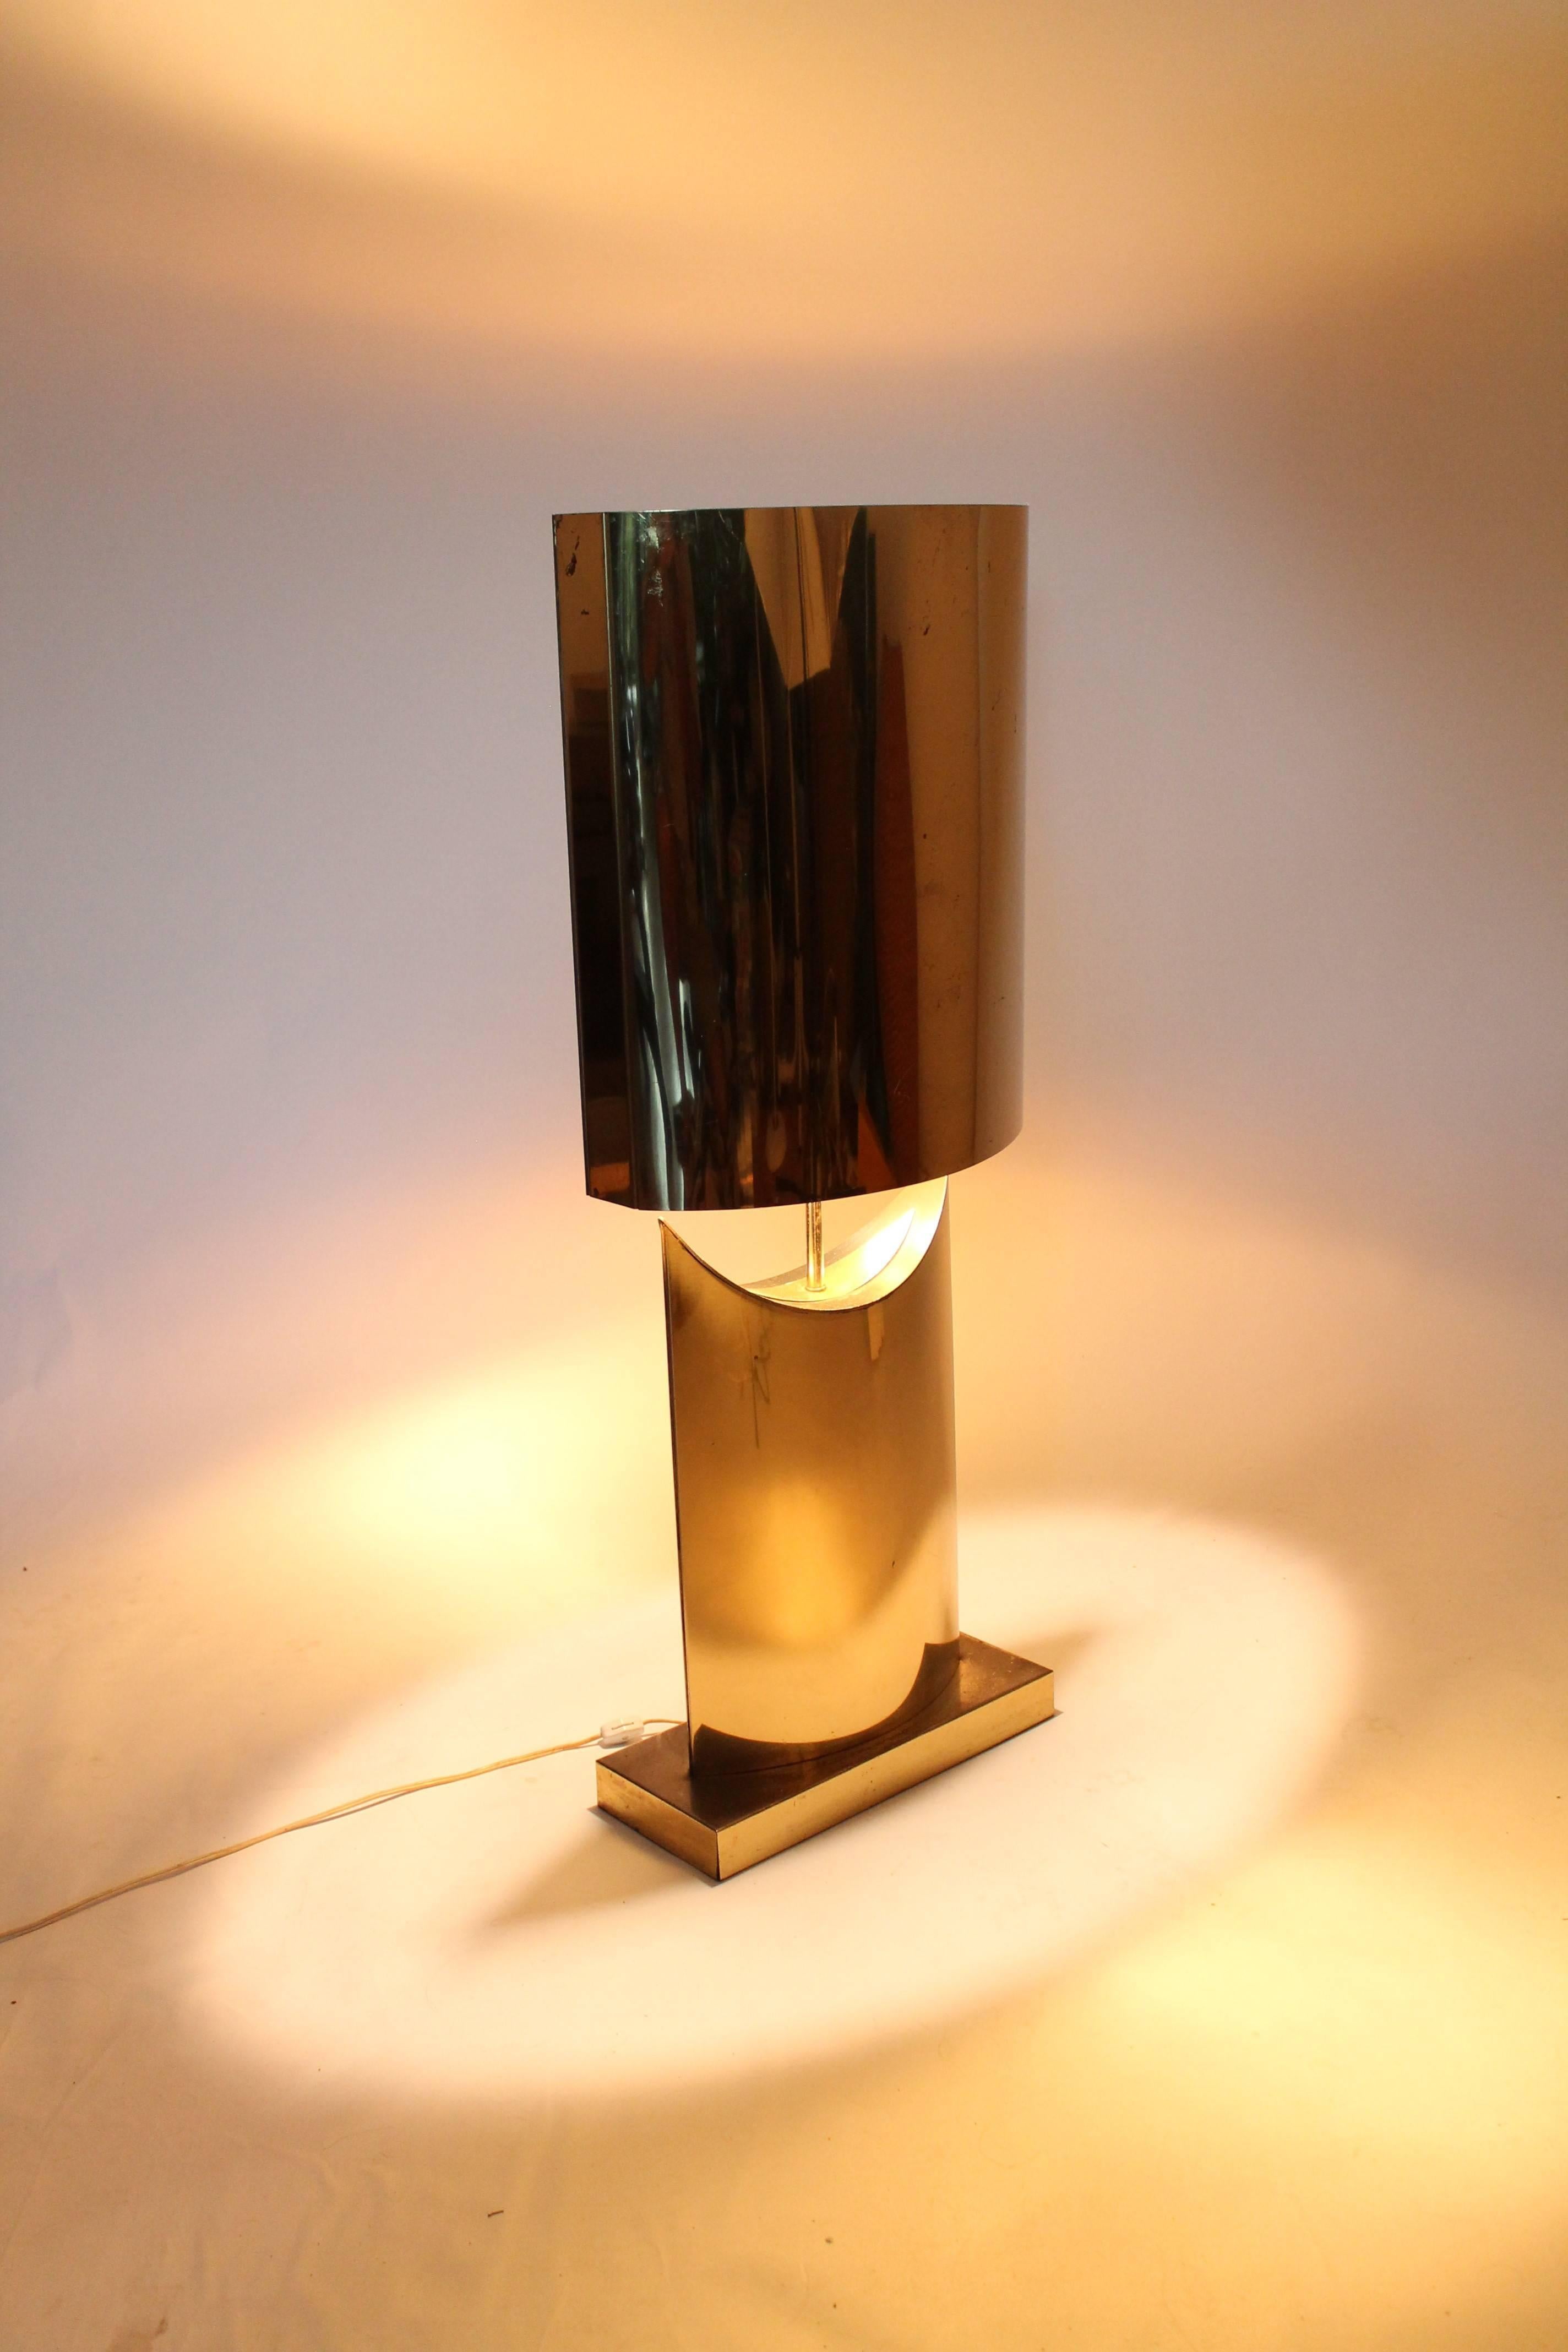 American C. Jere Huge Brass Plated Table Lamp , Mid-Century Modern, 1970s, USA